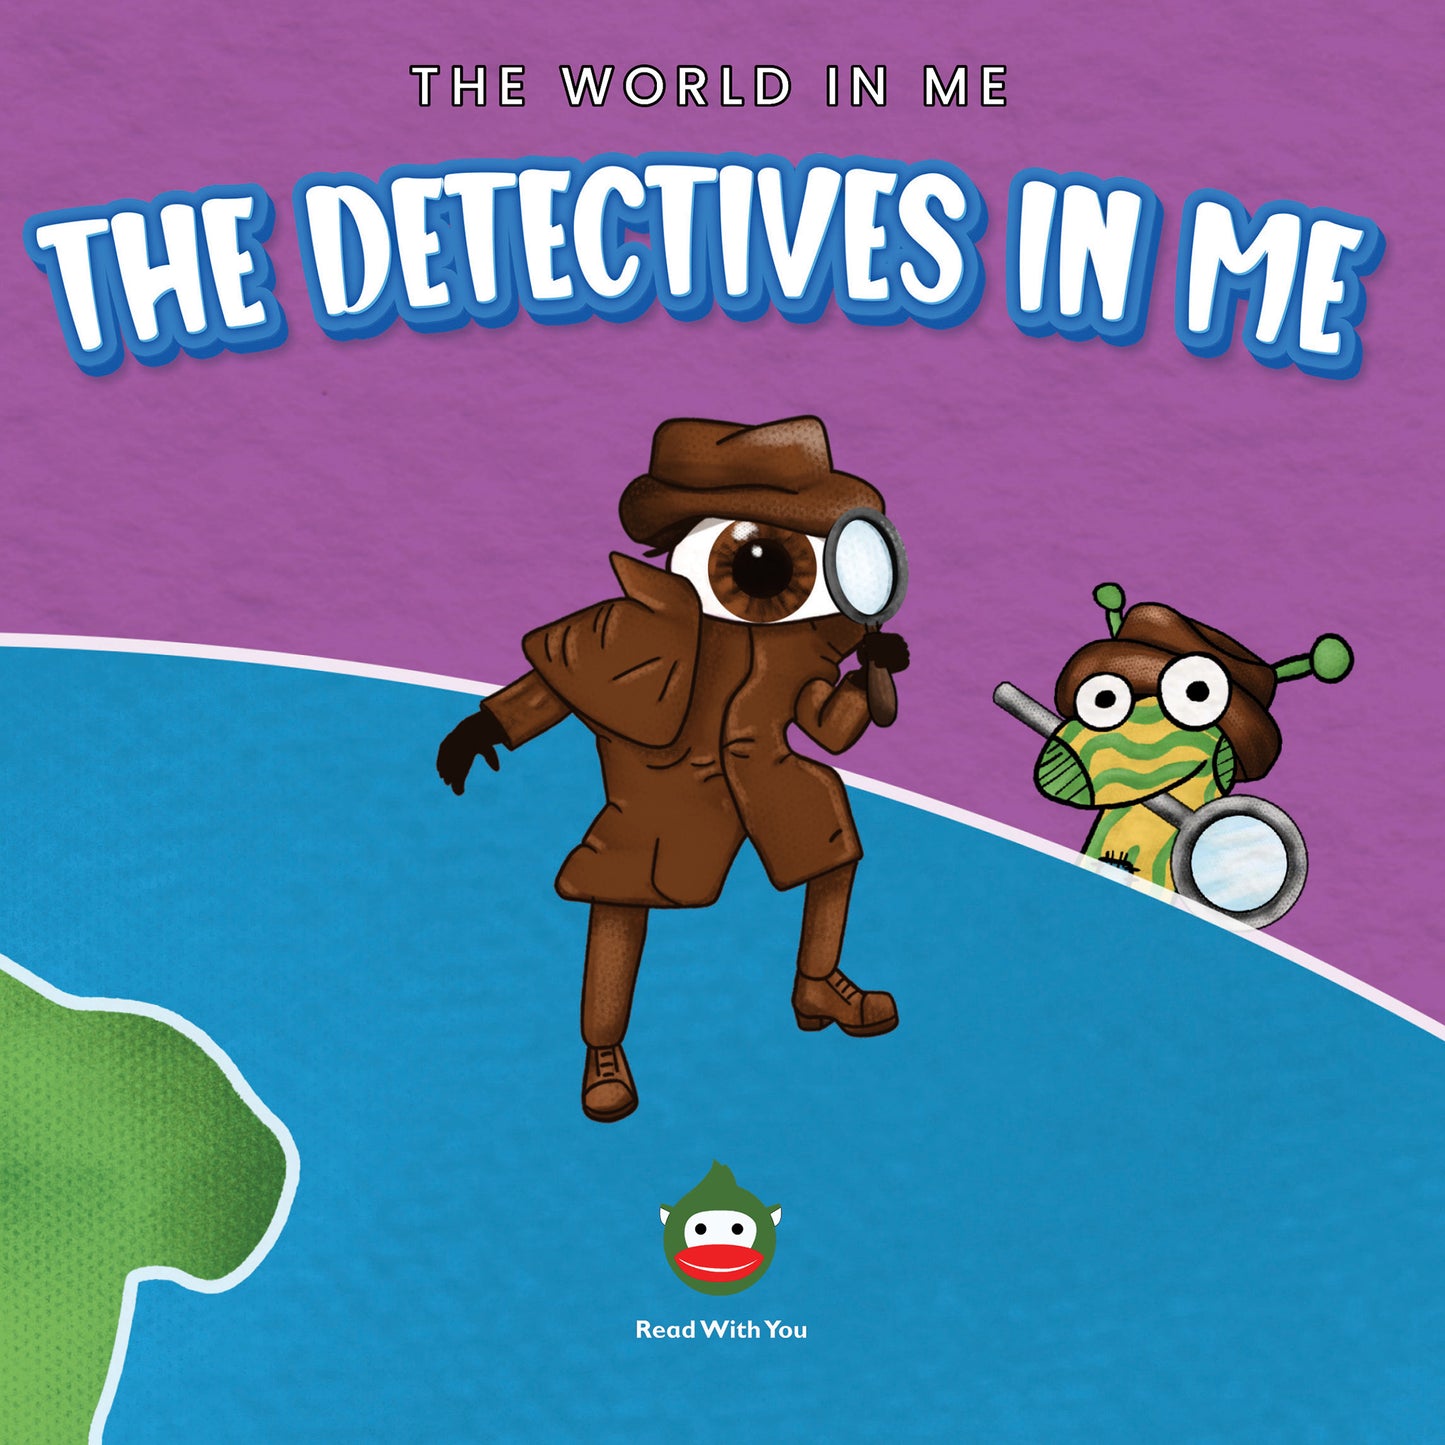 The Detectives in Me